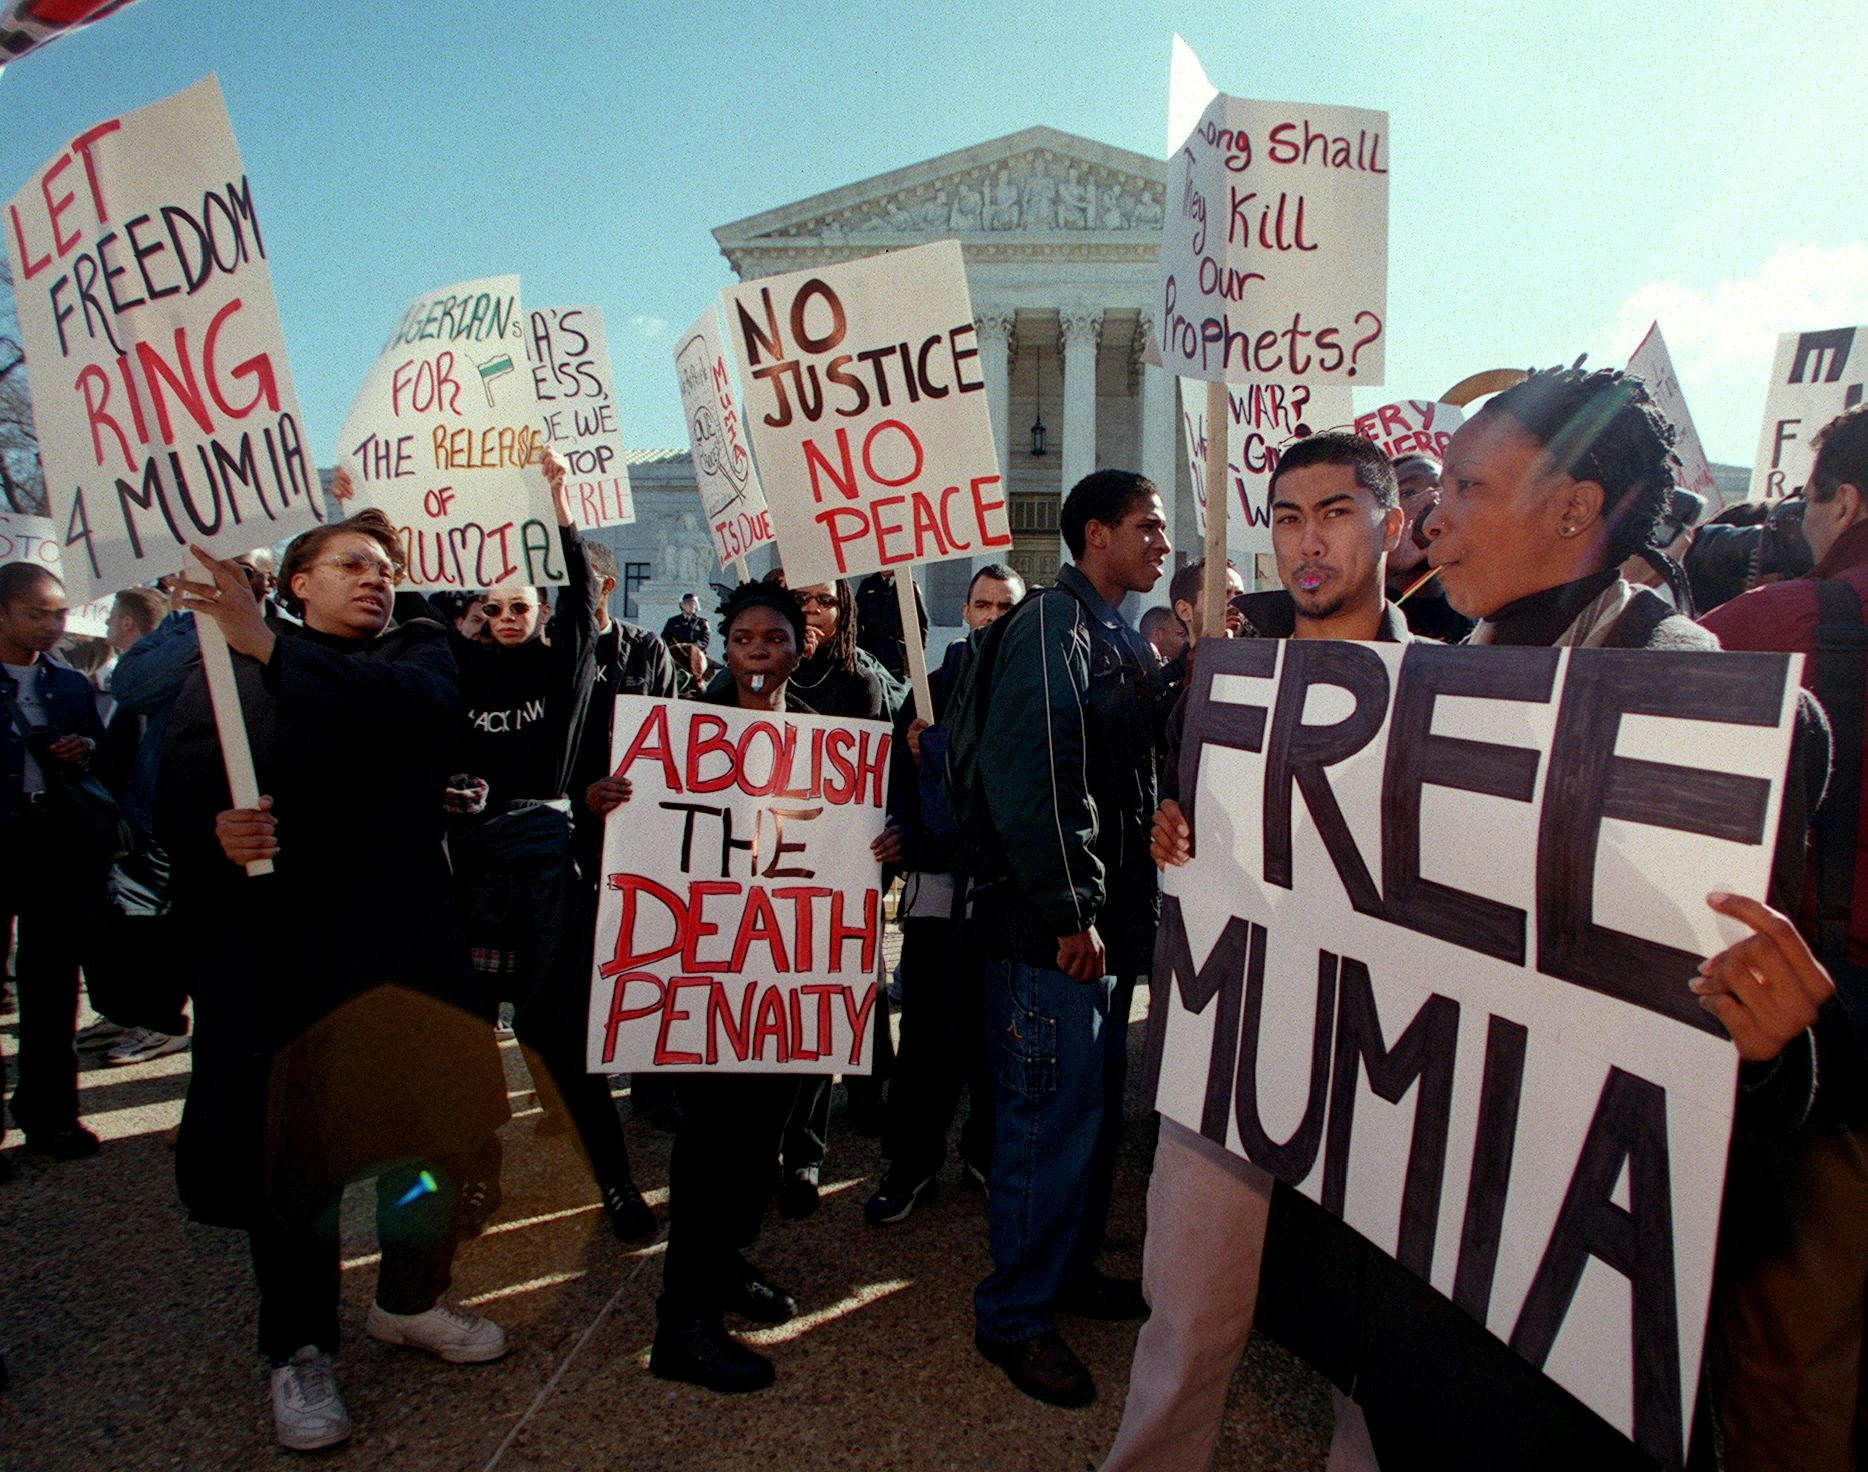 WASHINGTON, :  Protesters march with signs calling for the end of the death penalty during a demonstration 28 February, 2000 in front of the US Supreme Court in Washington, DC, as justices inside the Supreme Court hear arguments on the Effective Death Penalty Act of 1996, giving the right to appeal when there is new evidence of innocence. The protesters are seeking a new trial for former radio journalist and one time Black Panther Mumia Abu-Jamal who was sentenced to death for killing a Philadelphia police officer in 1981.    AFP PHOTO/Chris KLEPONIS (Photo credit should read CHRIS KLEPONIS/AFP via Getty Images)